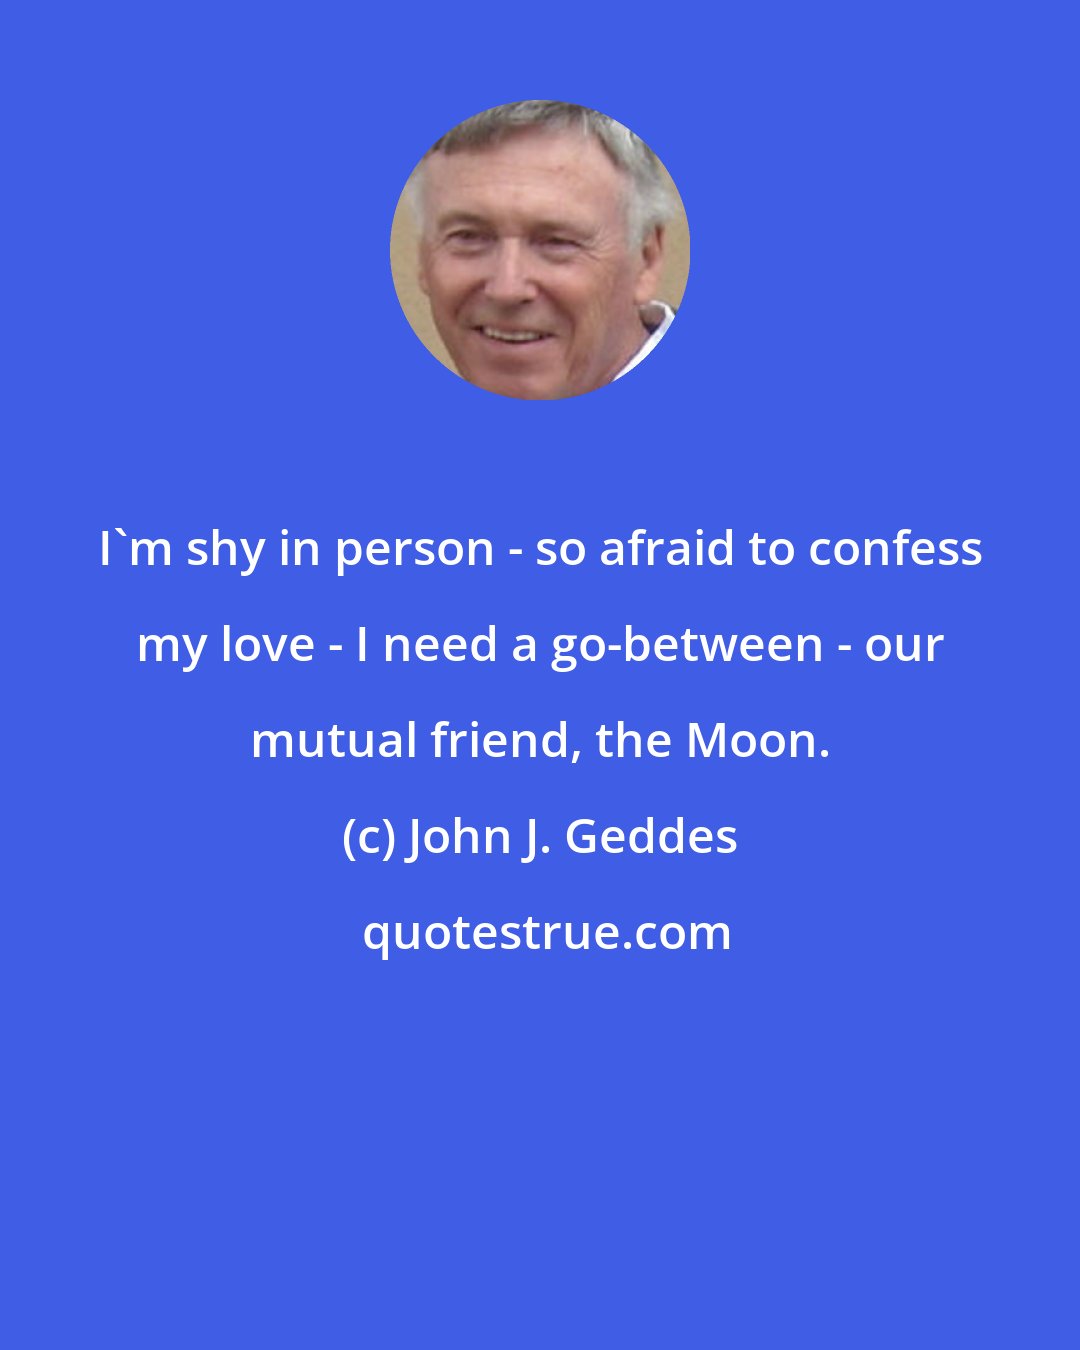 John J. Geddes: I'm shy in person - so afraid to confess my love - I need a go-between - our mutual friend, the Moon.